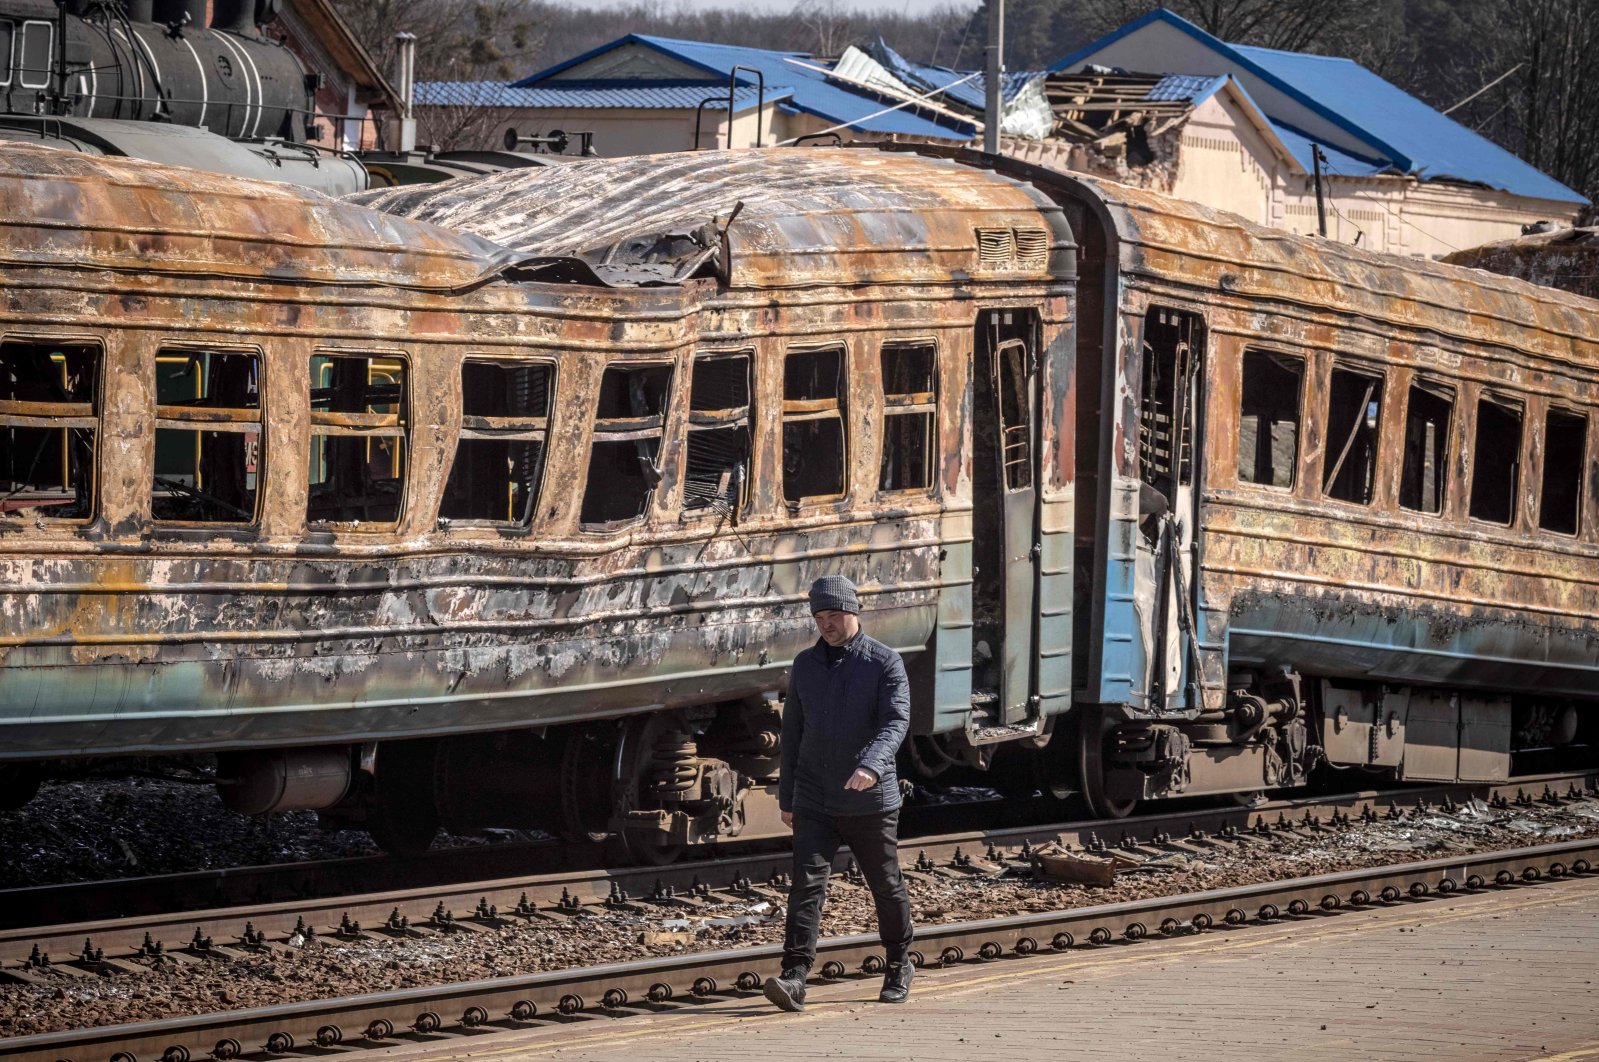 A man walks in front of a destroyed train in the northeastern city of Trostianets, Ukraine, March 29, 2022. (AFP Photo)